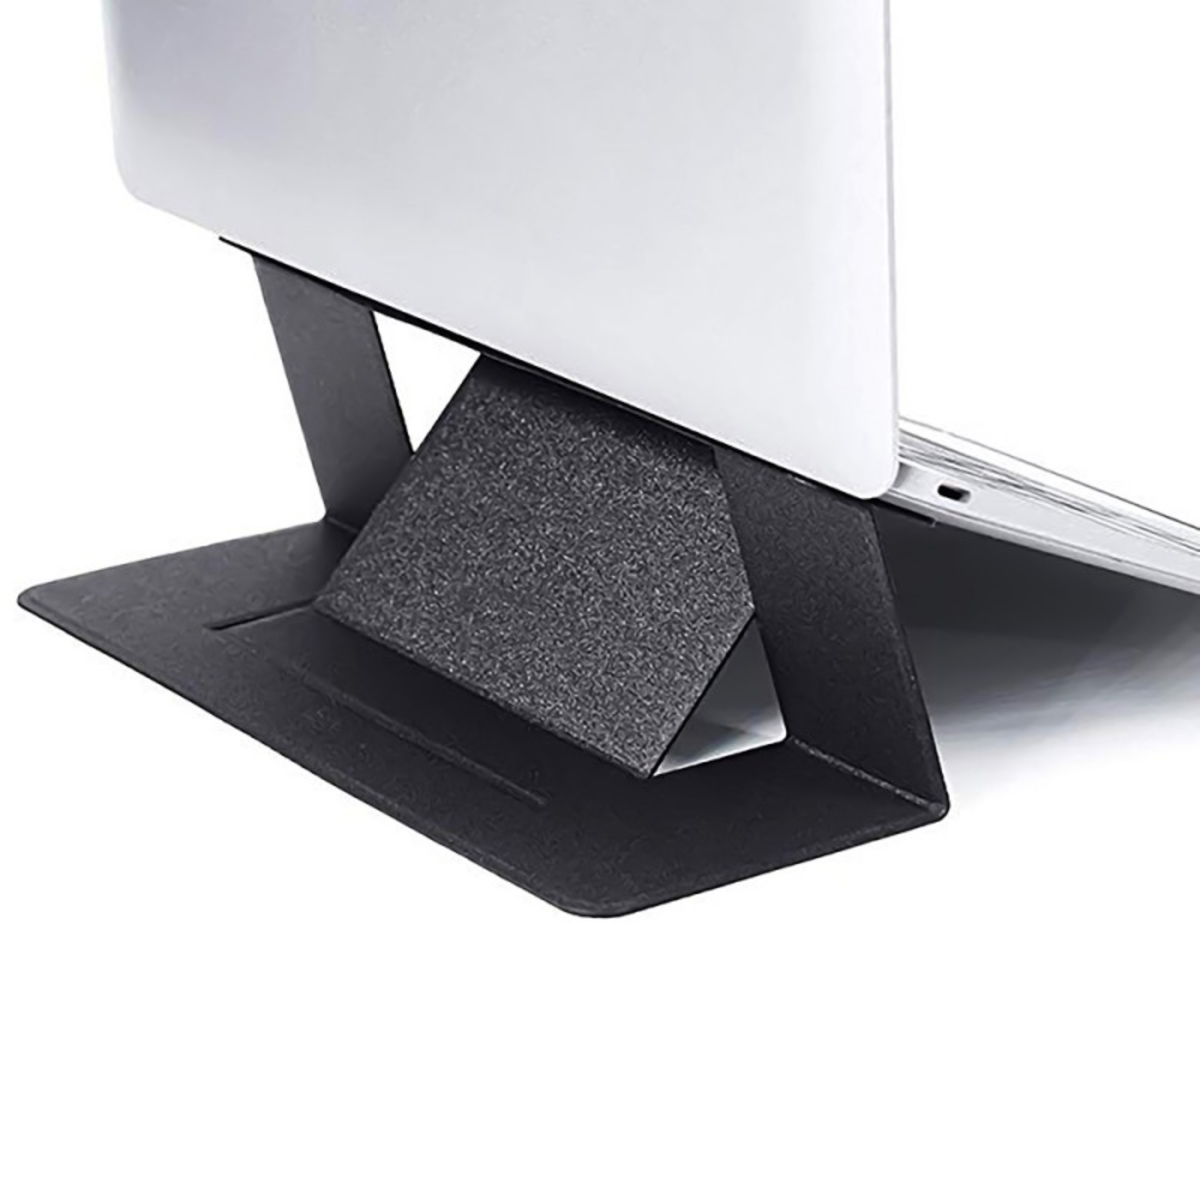 Trands Laptop Stand, TR-LS4158